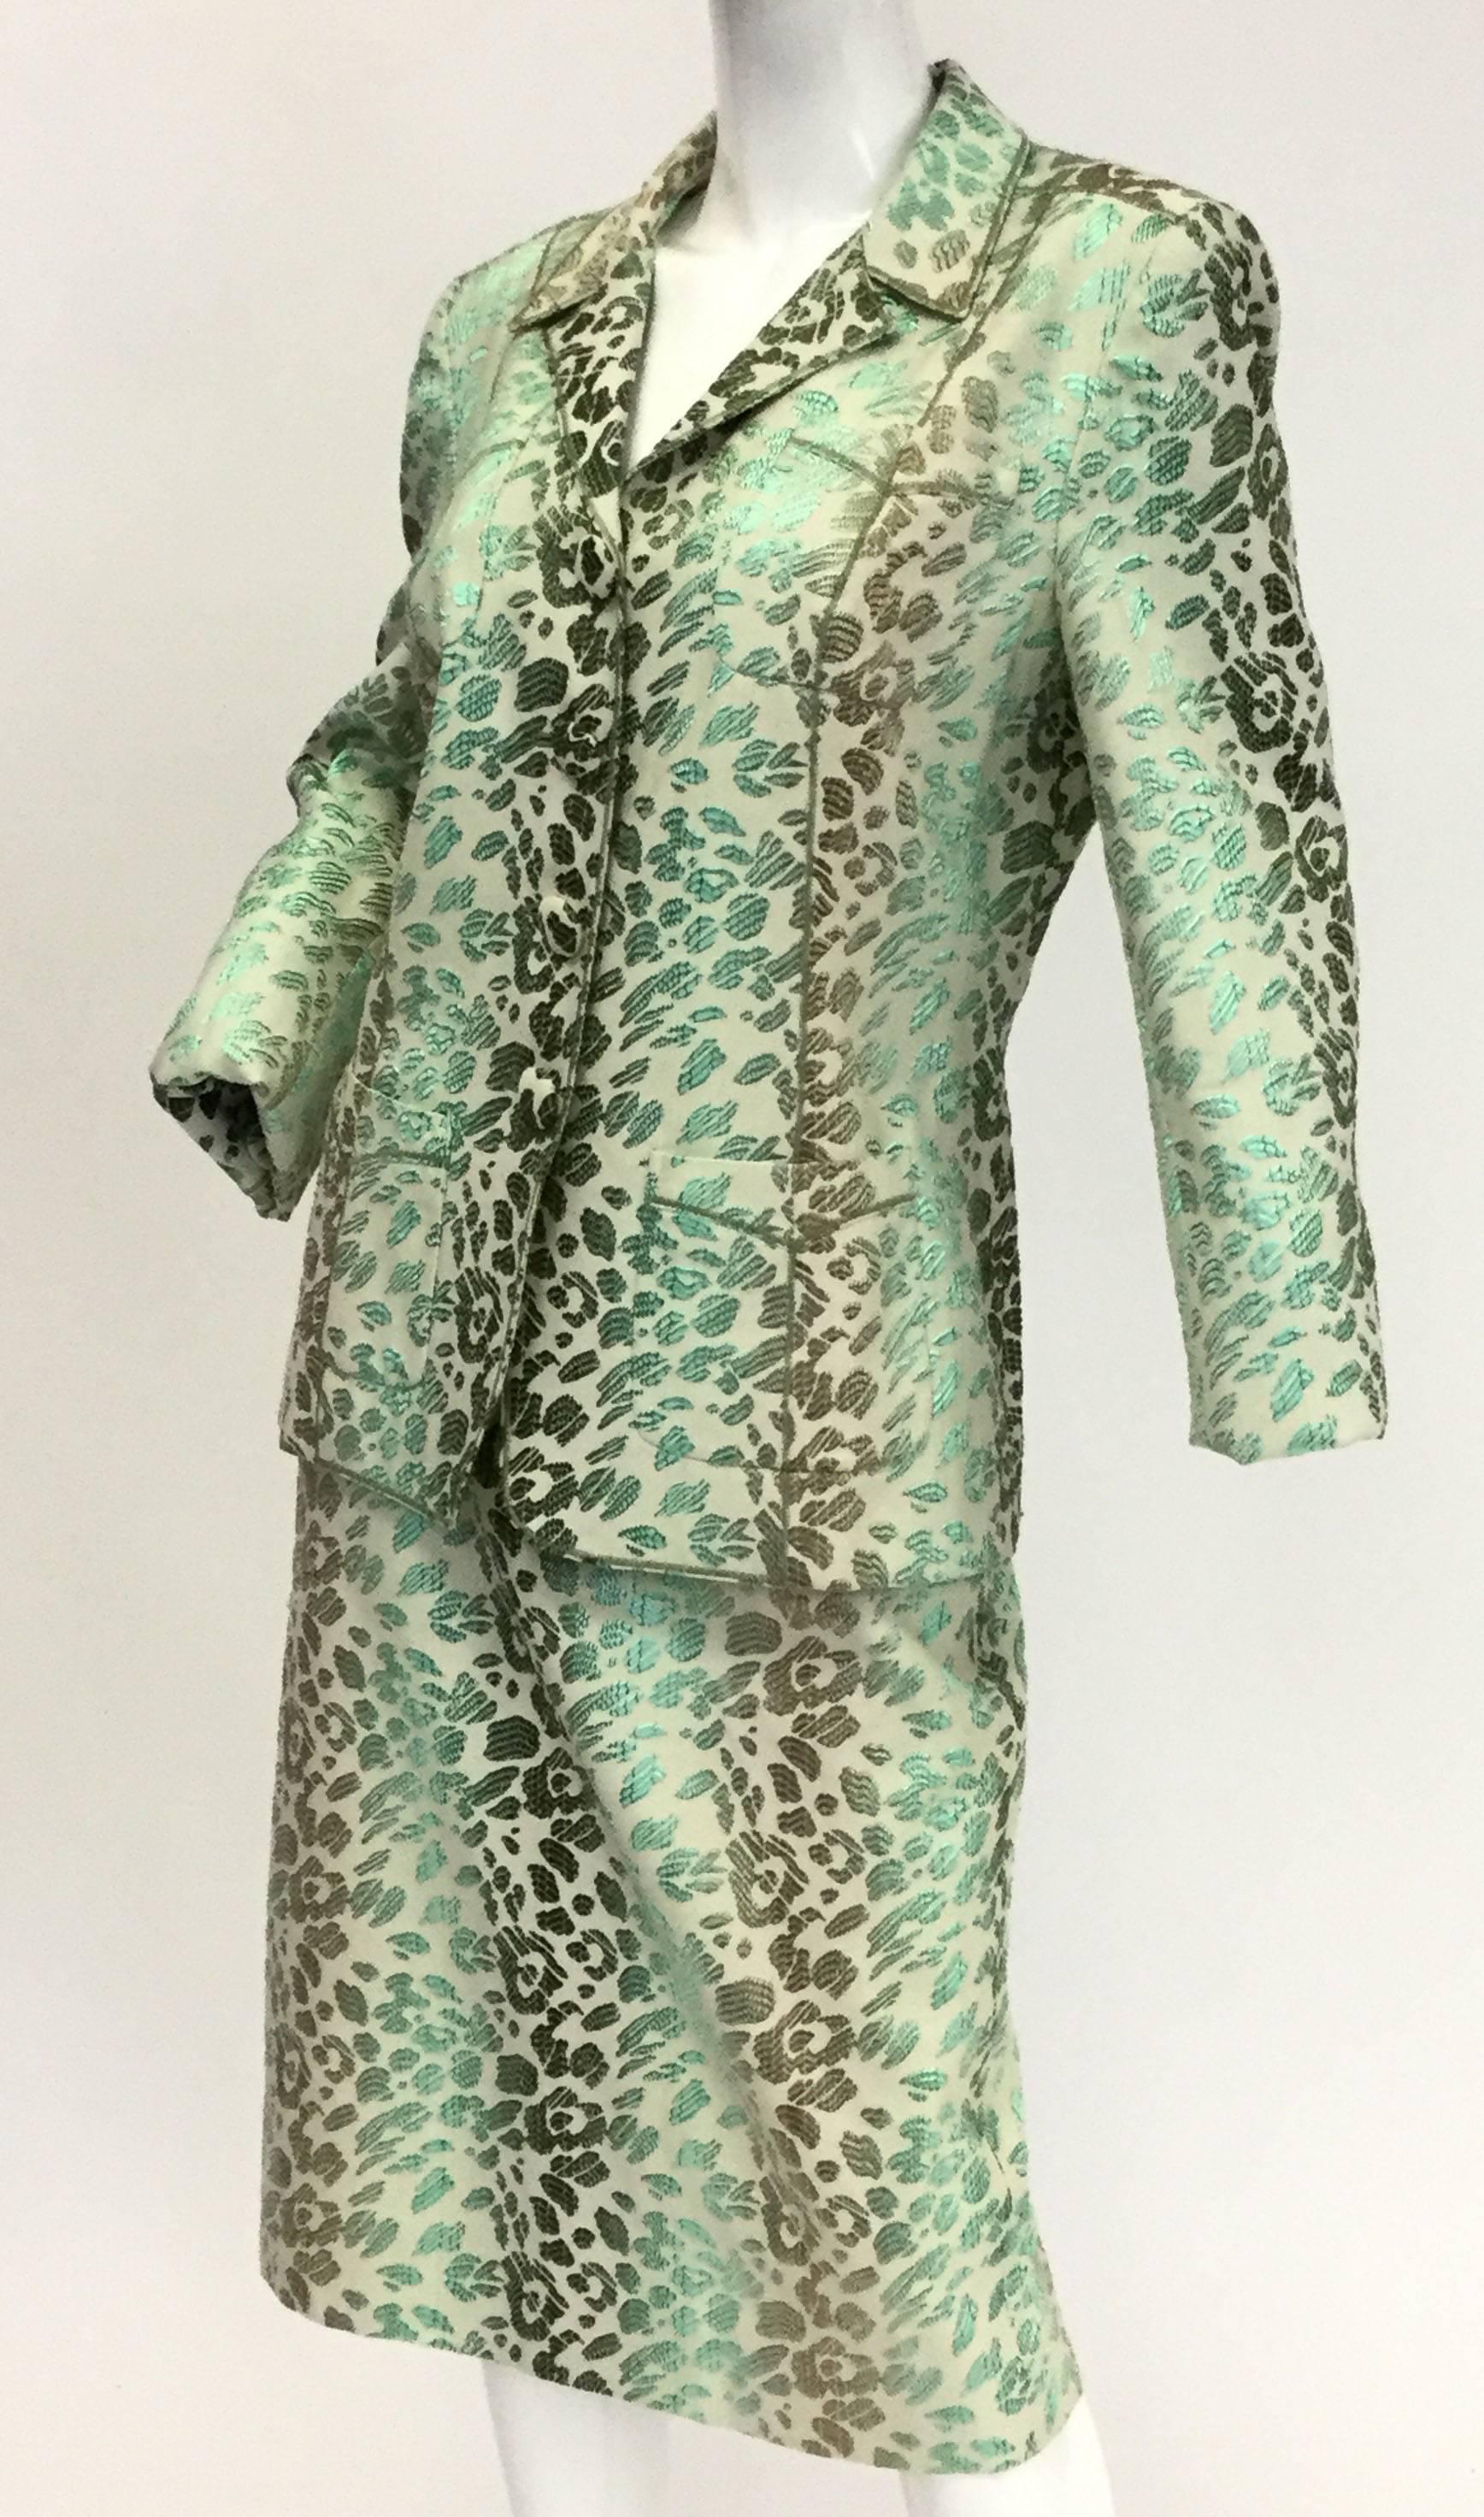 
Stand out from the crowd in this gorgeous suit by Oscar de la Renta! The ecru based fabric pops with color and movement thanks to the striking green ombre brocade cheetah print. The four-button blazer has a notched collar and two pockets at both